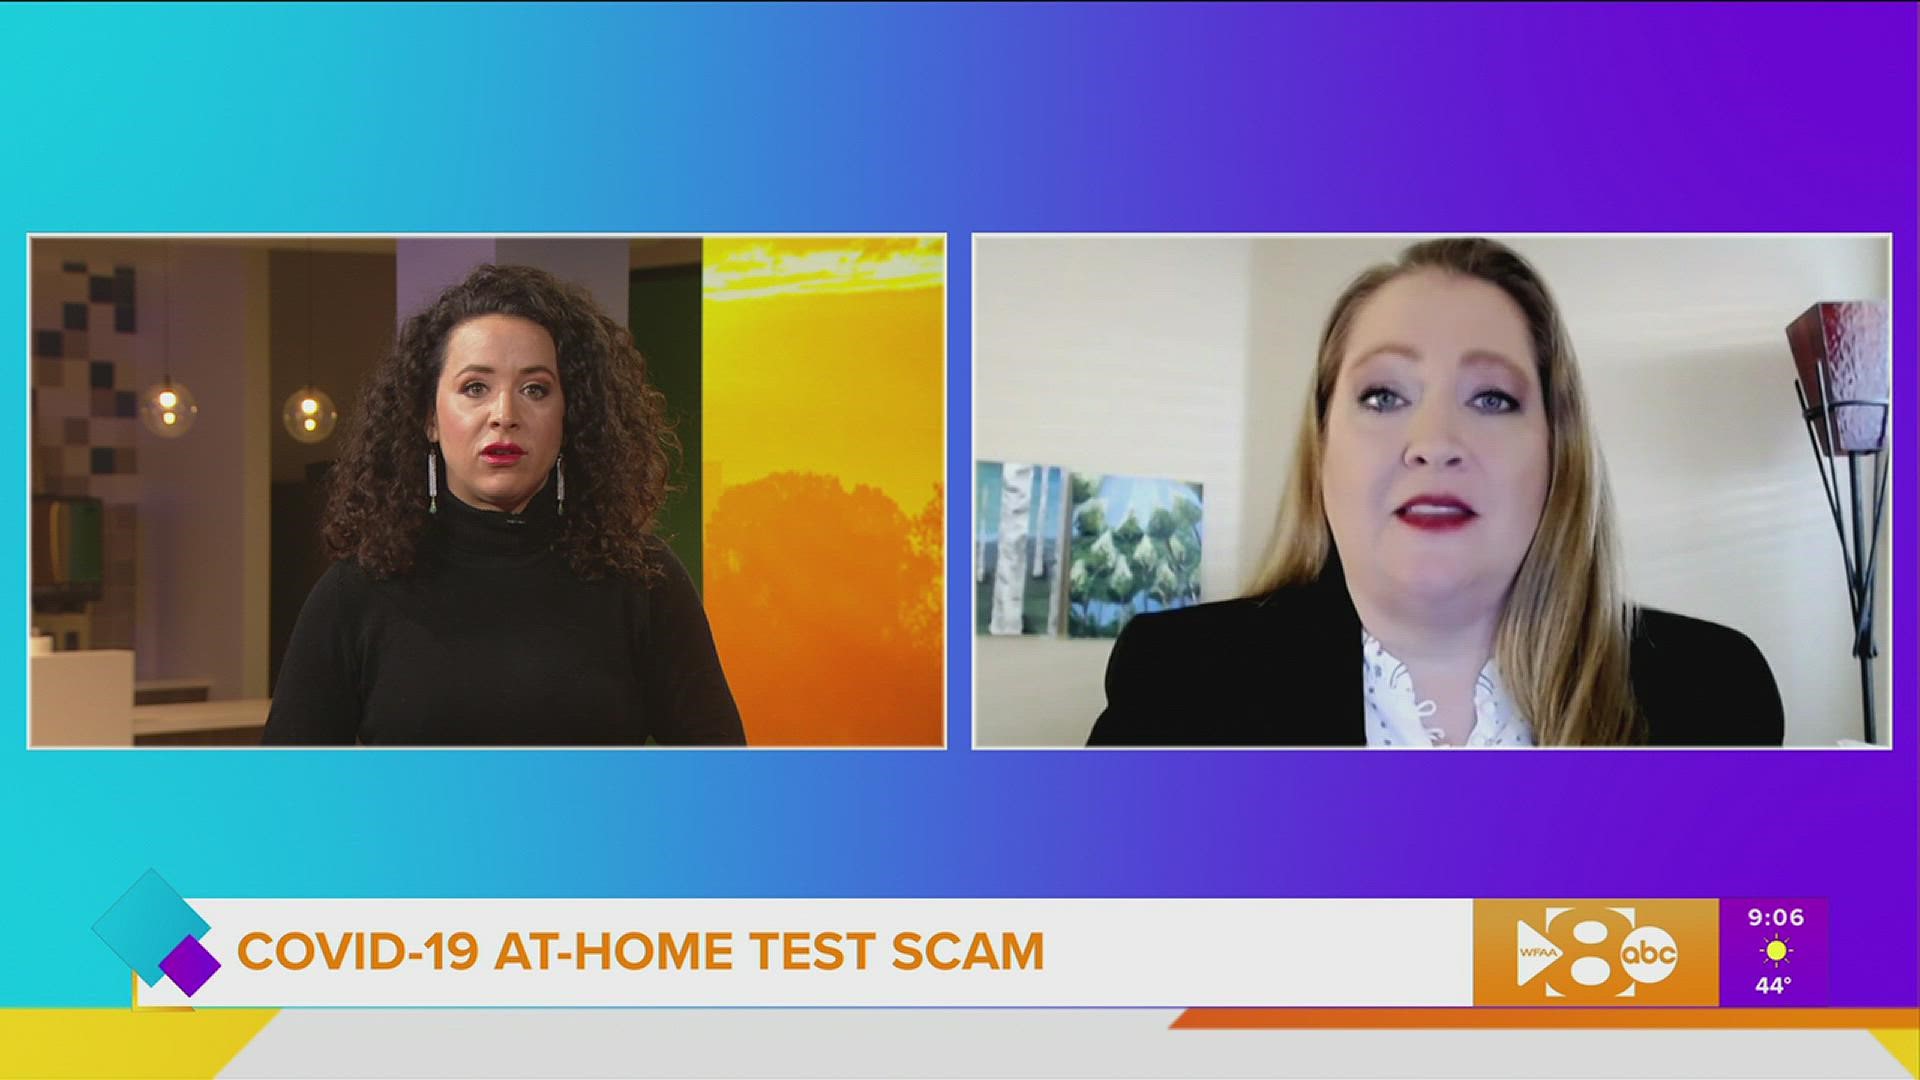 COVID-19 at-home tests can now get delivered to you for free, but steer clear of scammers. We’ve got some helpful tips to differentiate the real deal from a scam.